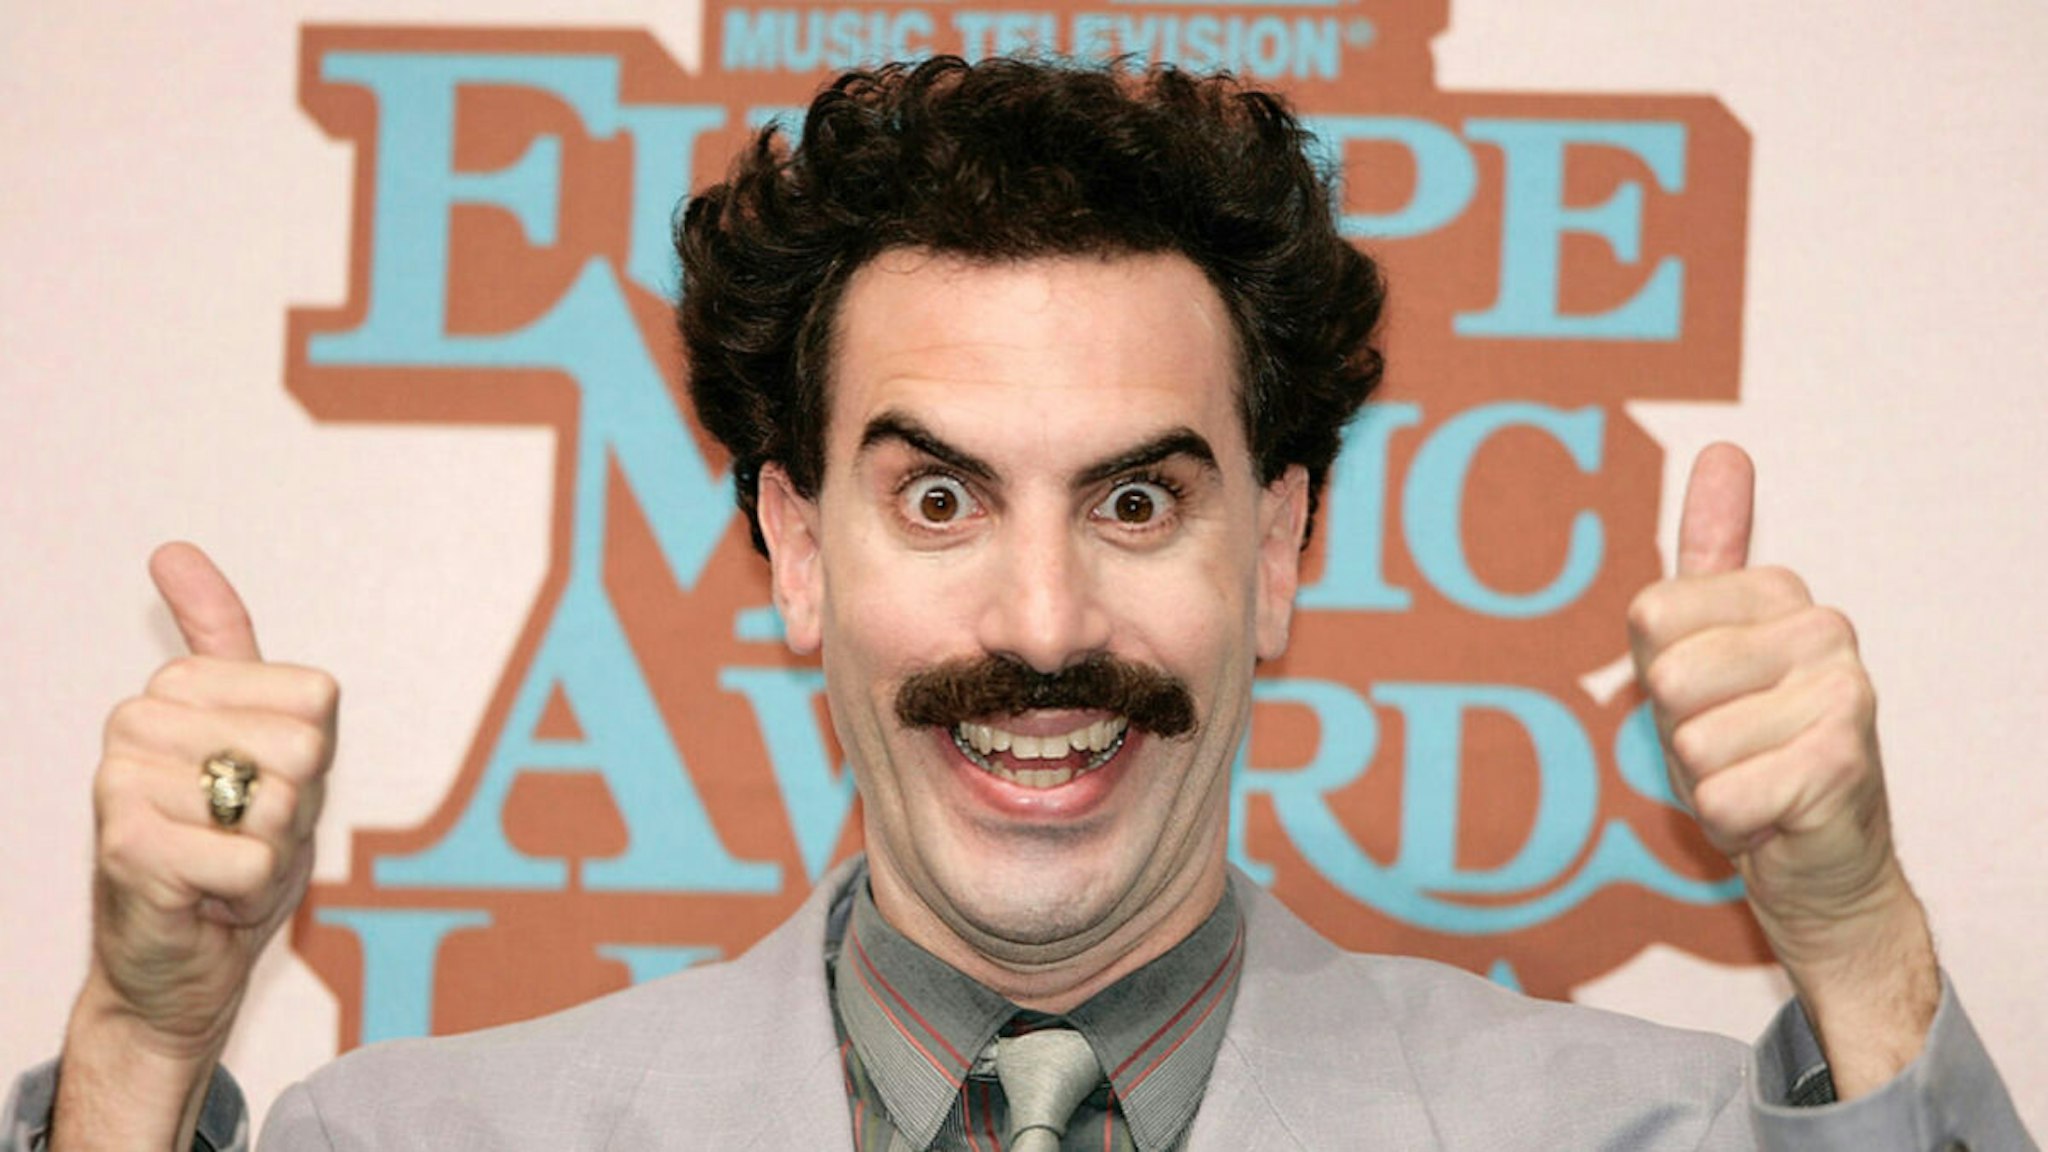 Presenter Sacha Baron Cohen playing the part of his comedy character "Borat" attends a photocall ahead of the 12th annual MTV Europe Music Awards 2005 at the Atlantic Pavilion on November 2, 2005 in Lisbon, Portugal.